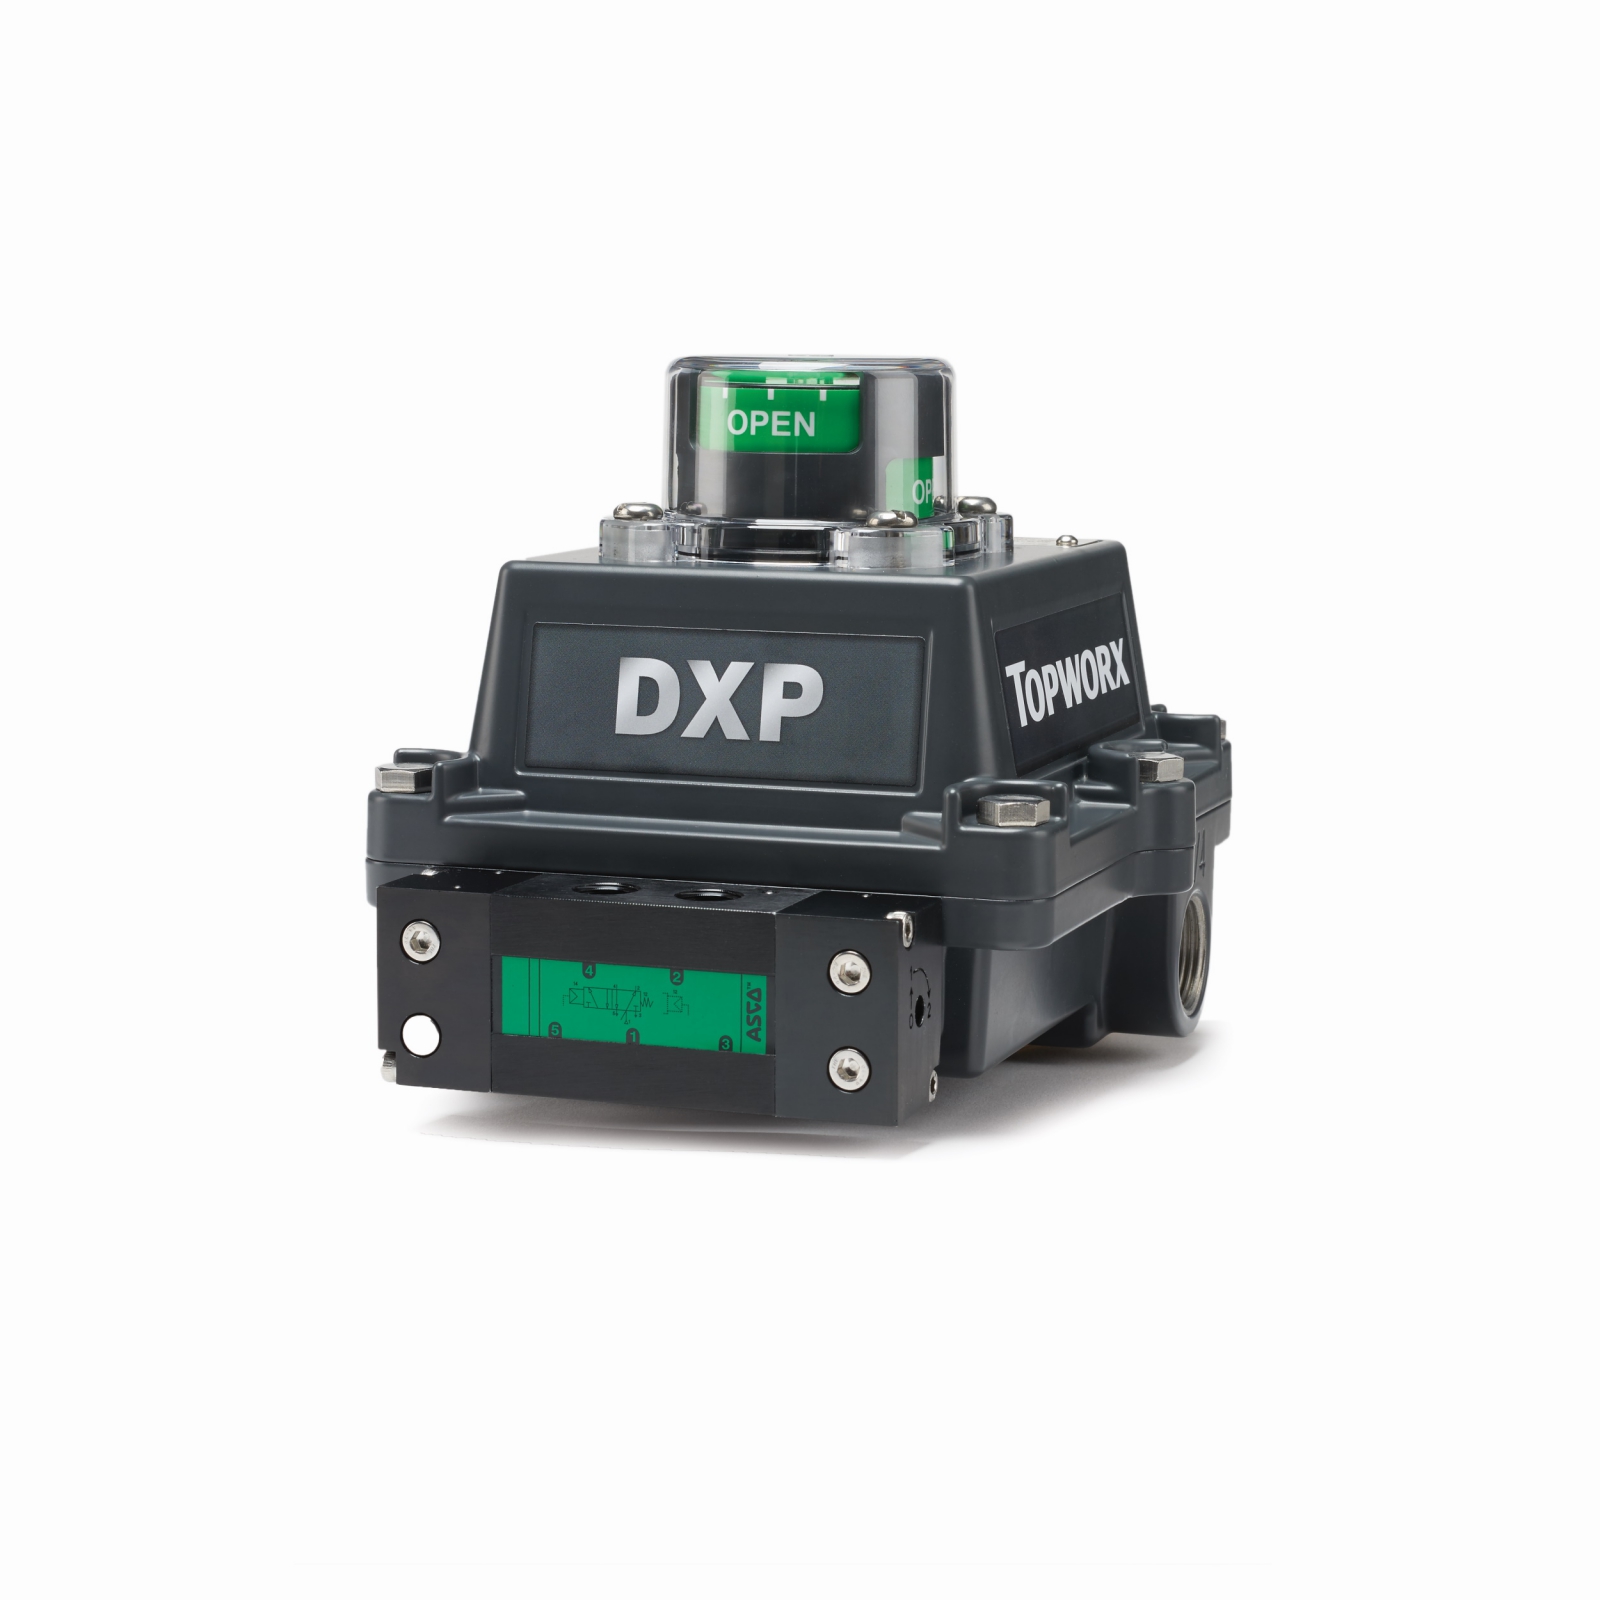 TopWorx D-Series discrete valve controllers with
HART are certified for use in every world area for
continuous performance monitoring